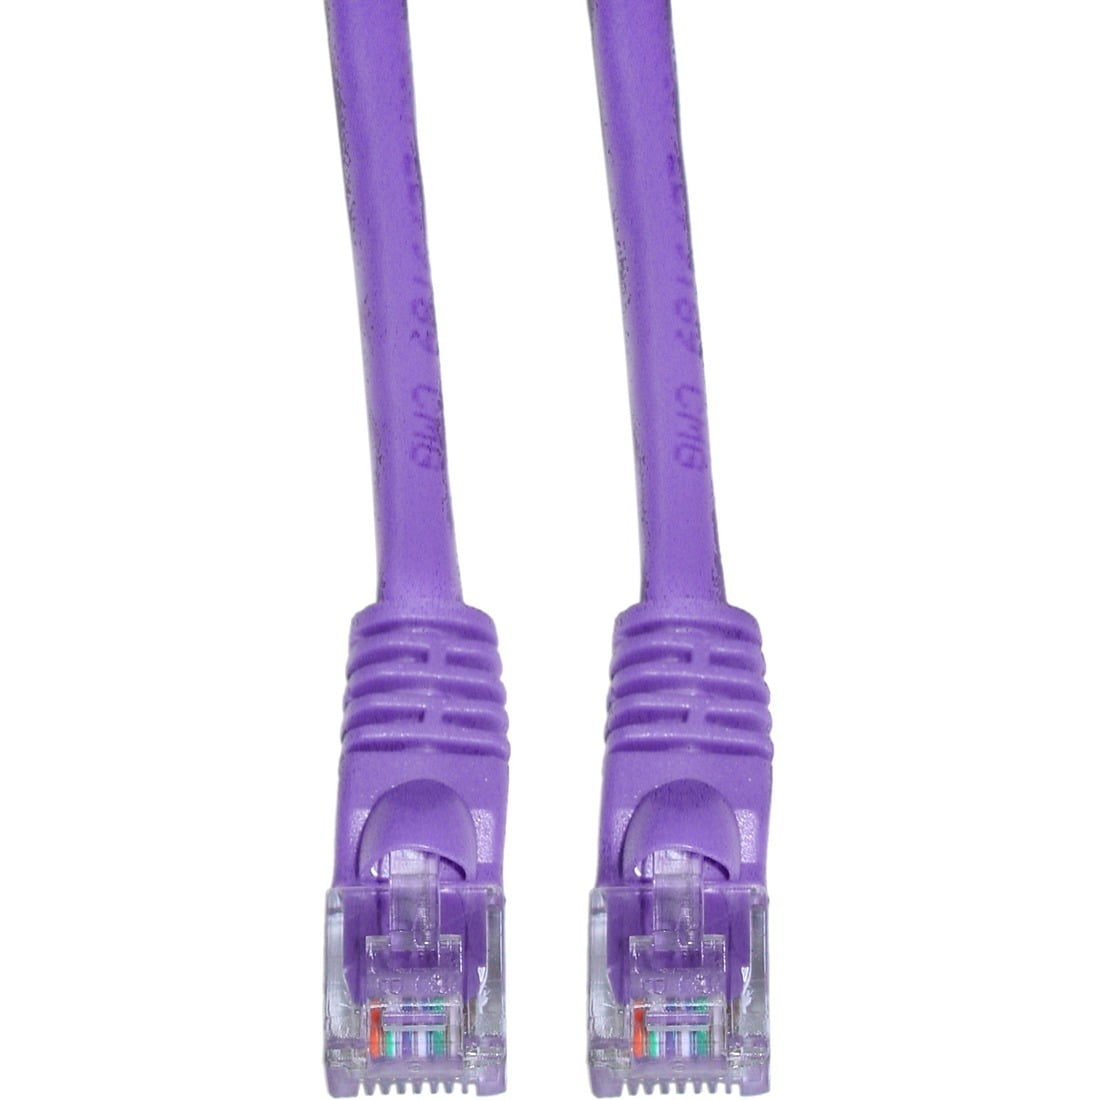 PcConnectTM CAT5E UTP Purple 2 Foot Snagless/Molded Boot Ethernet Cable 